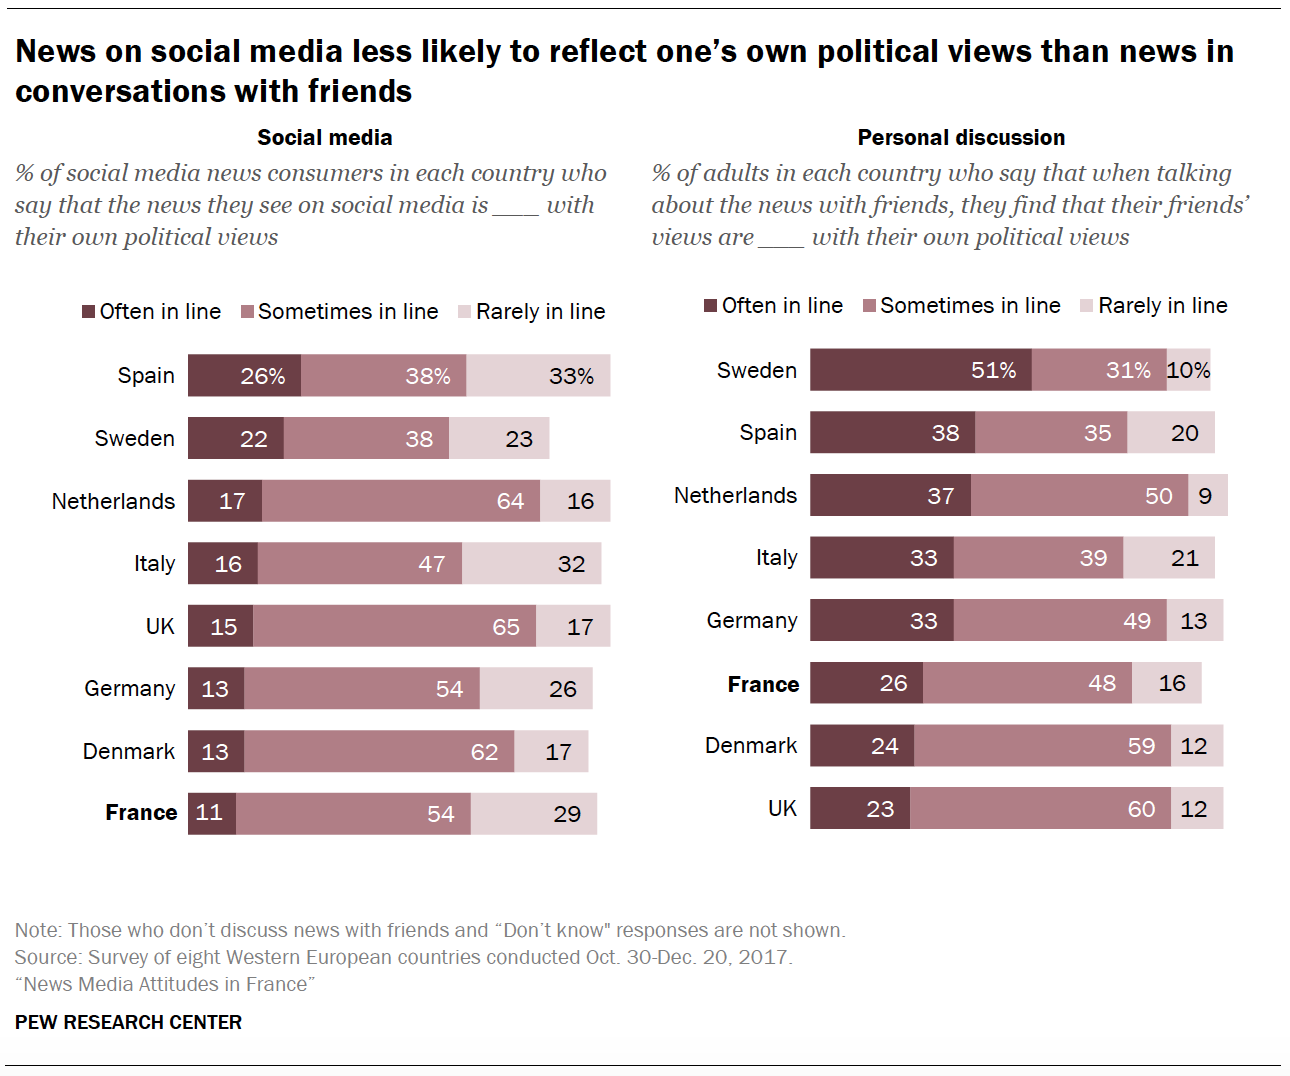 News on social media less likely to reflect one's own political views than news in conversations with friends